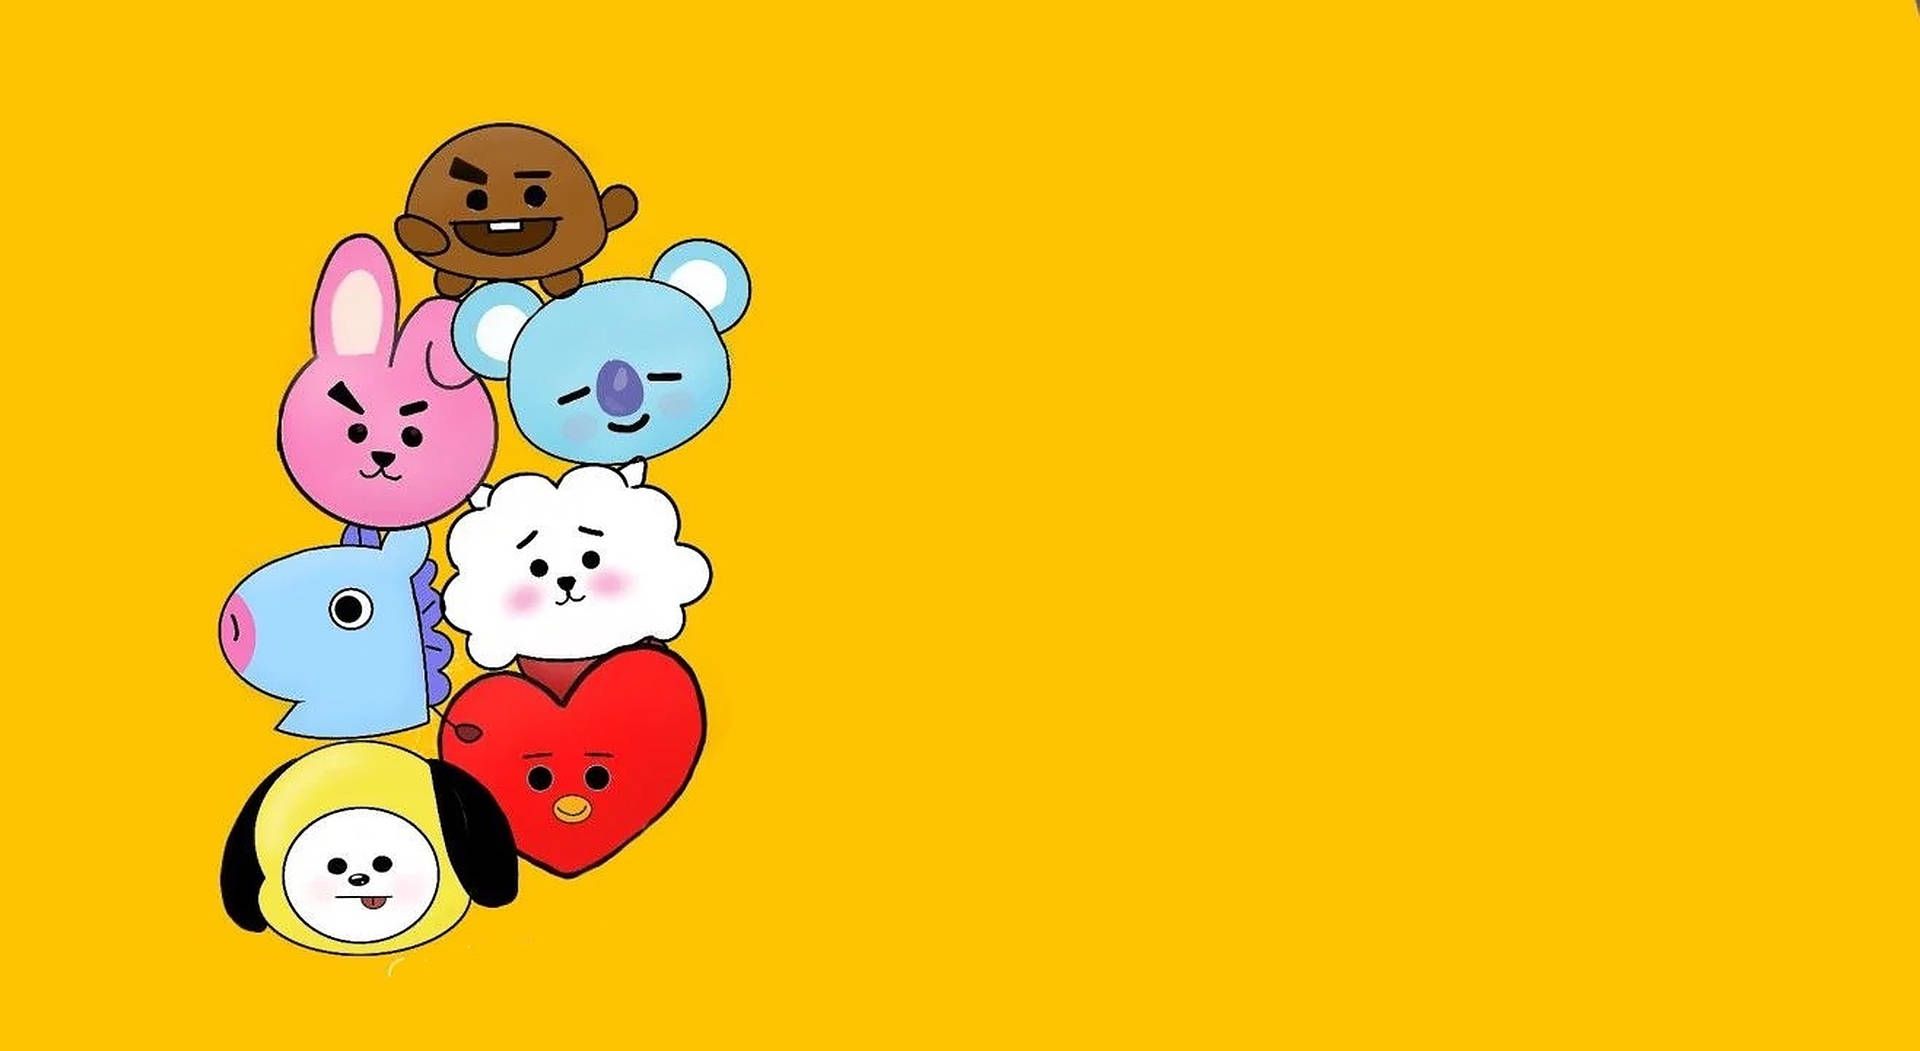 BT21 iPhone Wallpaper with high-resolution 1920x1080 pixel. You can use this wallpaper for your iPhone 5, 6, 7, 8, X, XS, XR backgrounds, Mobile Screensaver, or iPad Lock Screen - BT21